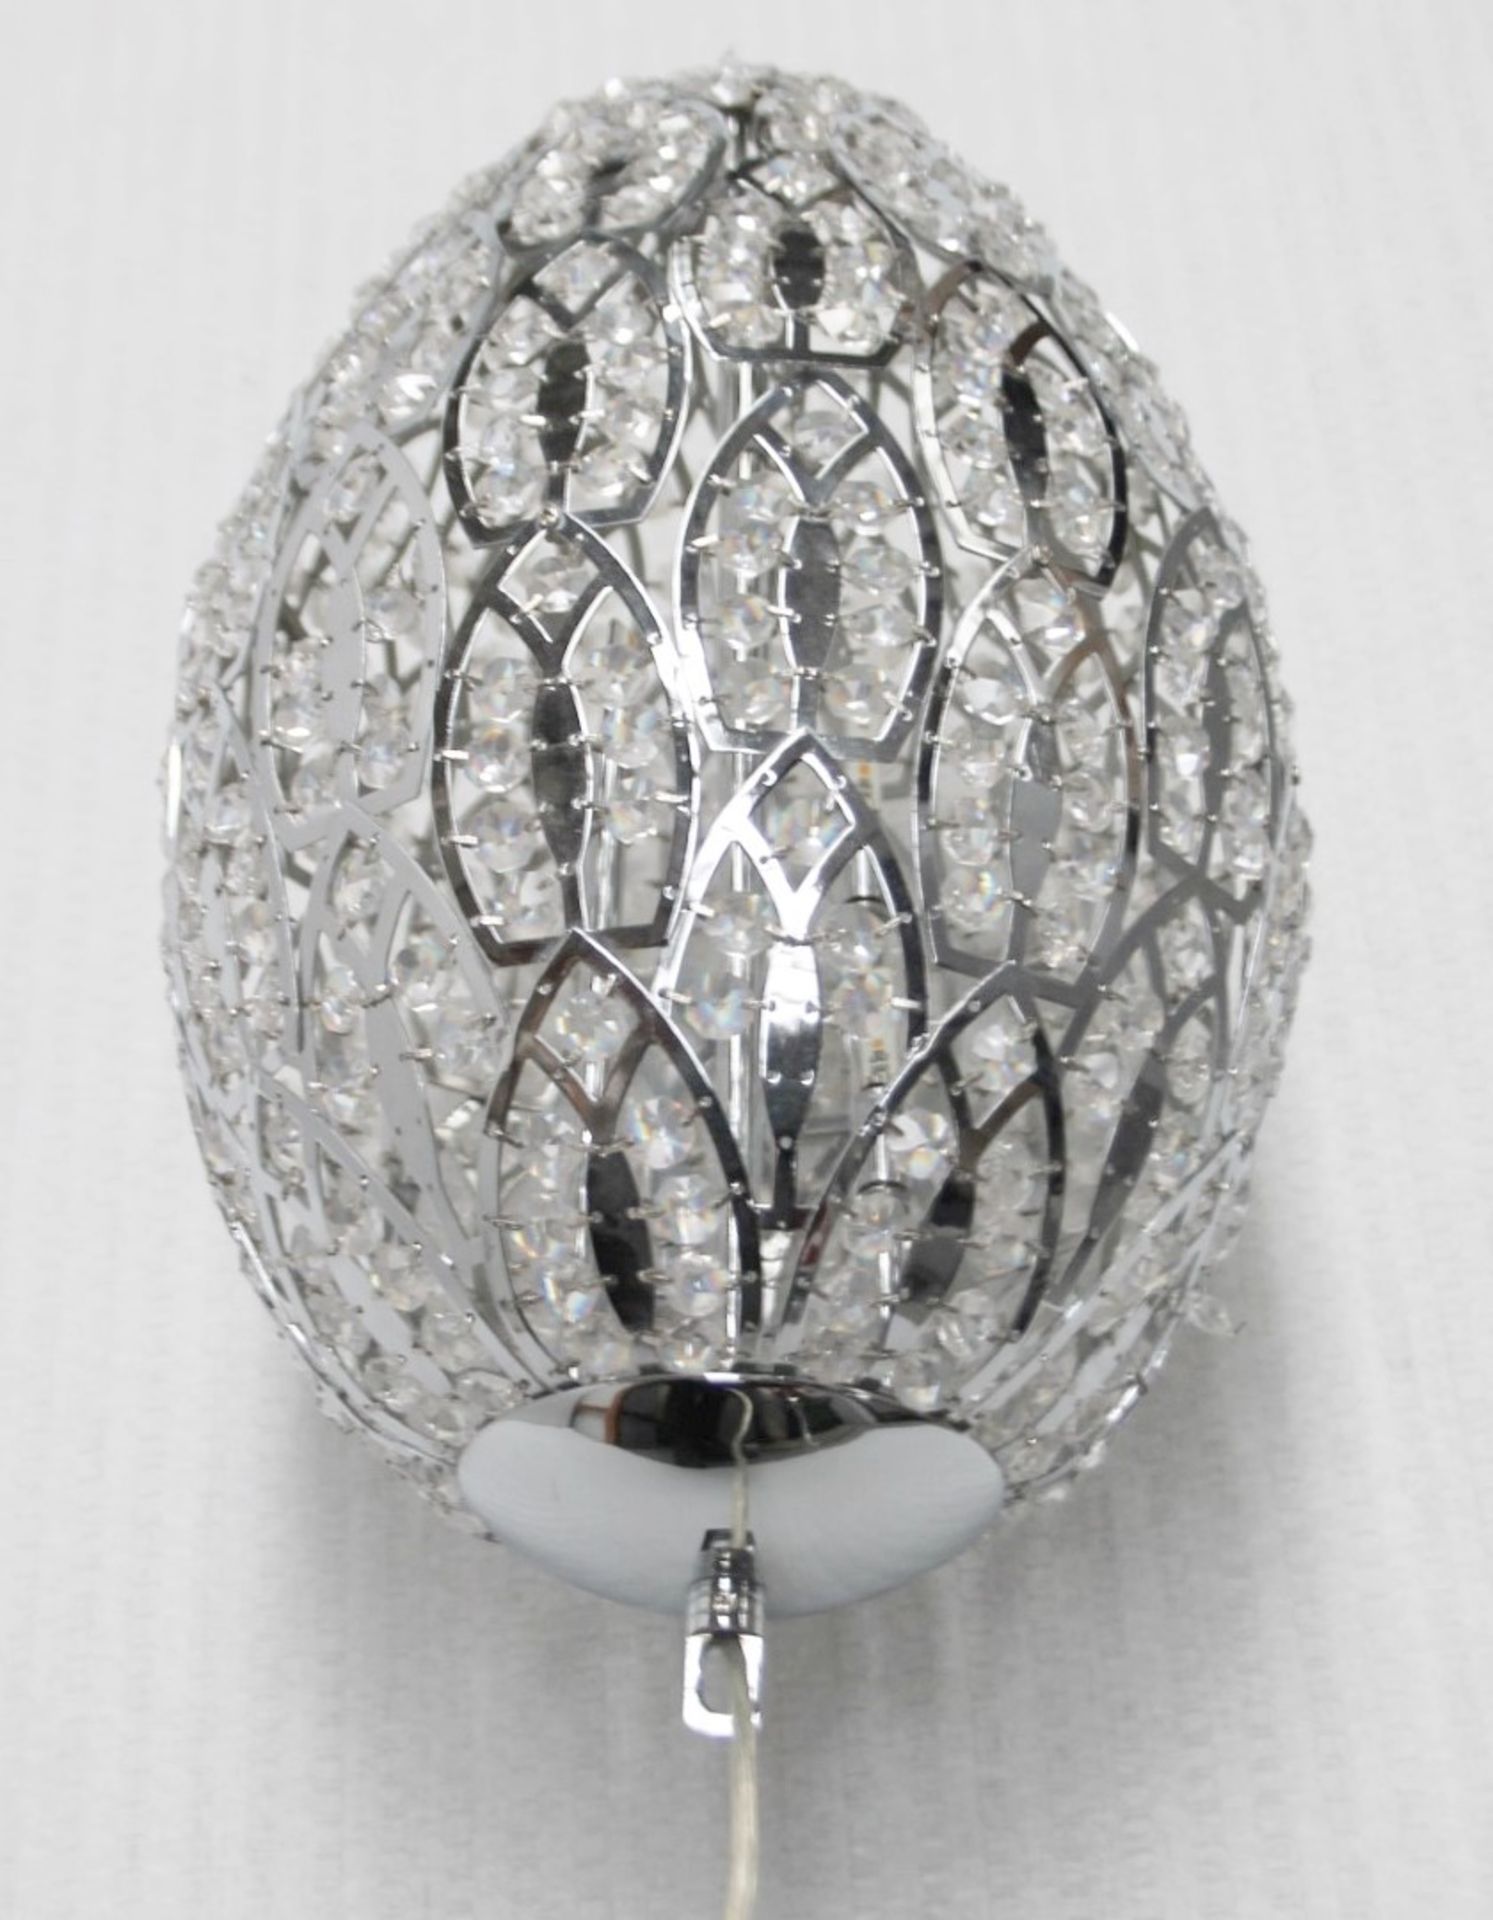 1 x High-end Italian LED Egg-Shaped Light Fitting Encrusted In Premium ASFOUR Crystals - RRP £4,000 - Image 6 of 9